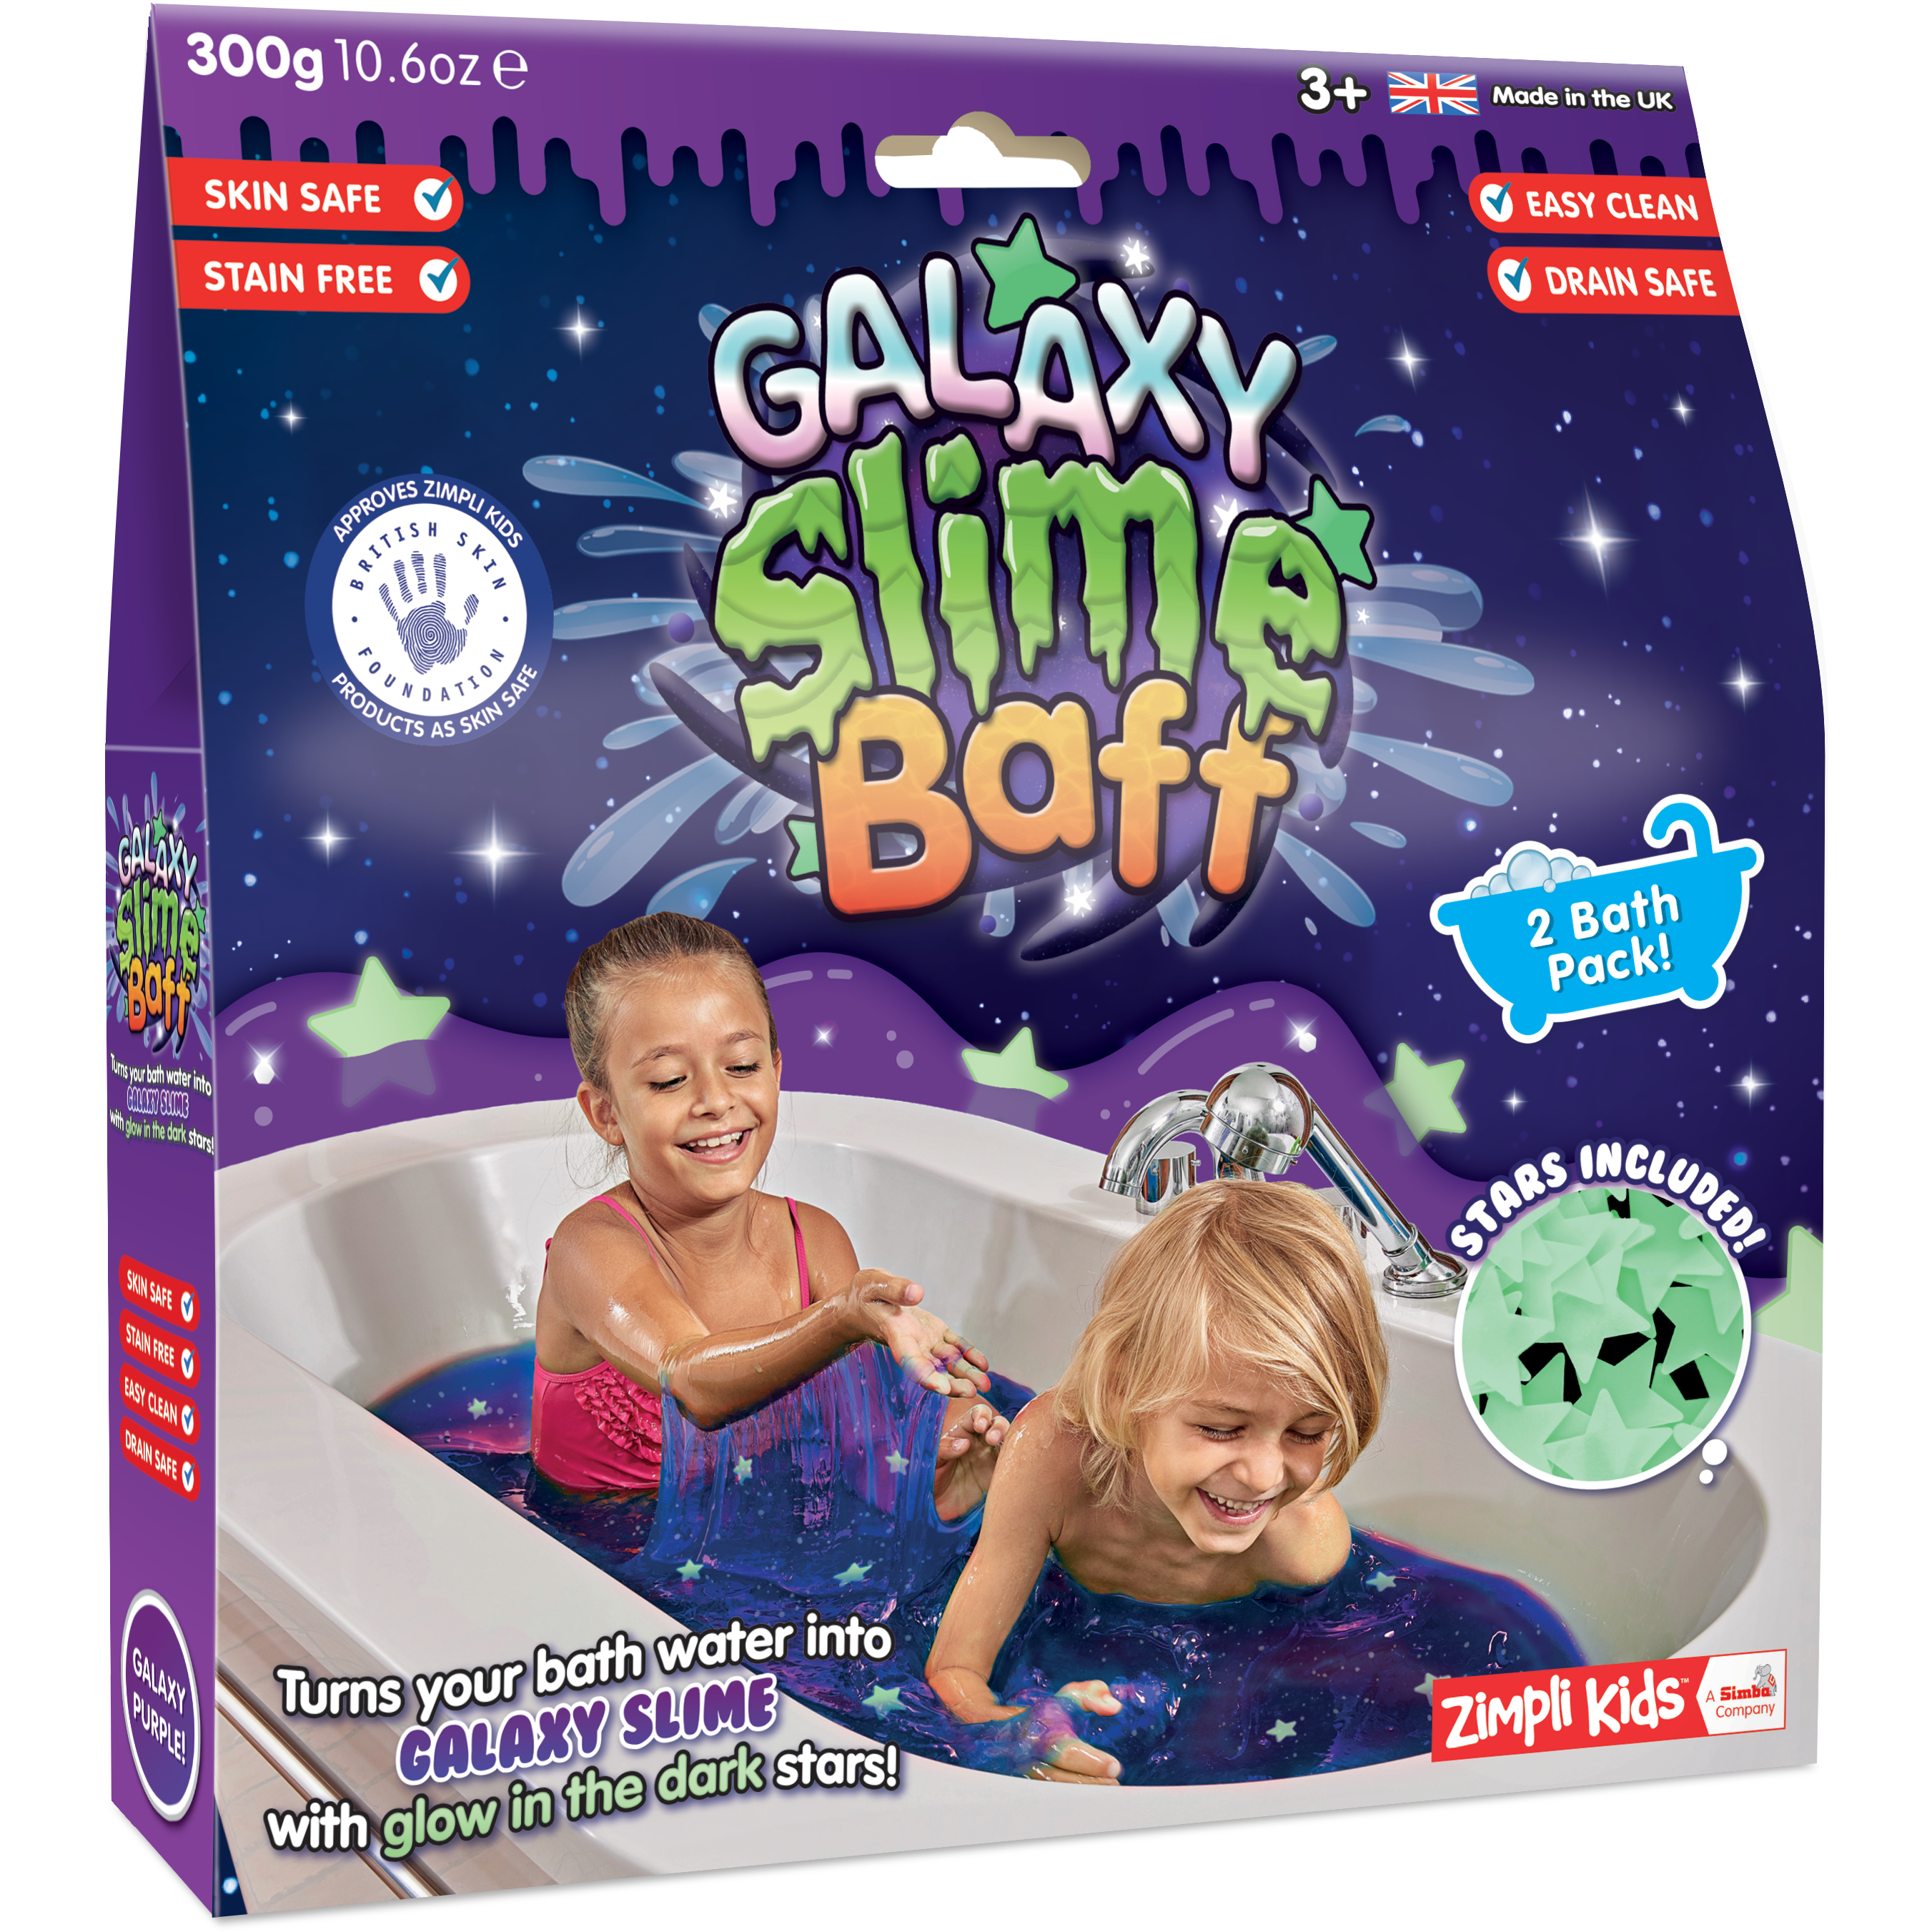 Gooey bath of Slime! Slime Baff  Turn your boring water into an exciting  slime bath with ZIMPLI KIDS SLIME BAFF! 🤩🛀🎉 ​Slime Baff safely turns  your bath water into a gooey